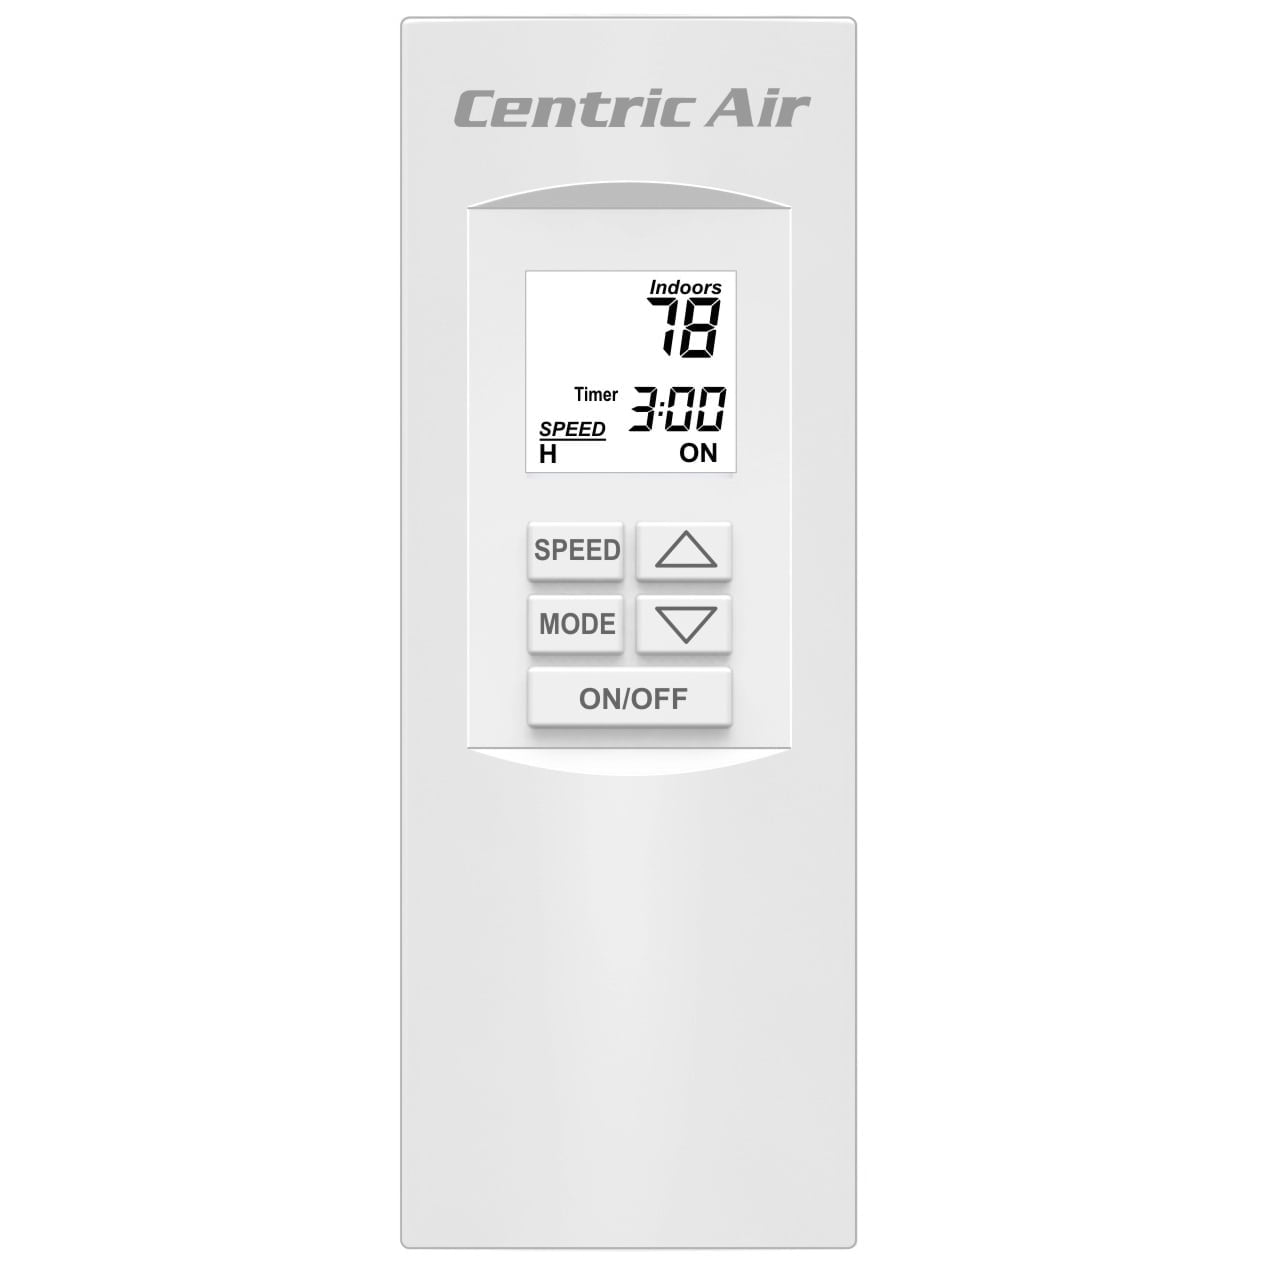 https://www.centricair.com/wp-content/uploads/2019/06/2-speed-remote-timer-temperature-control-RT3-square.jpg